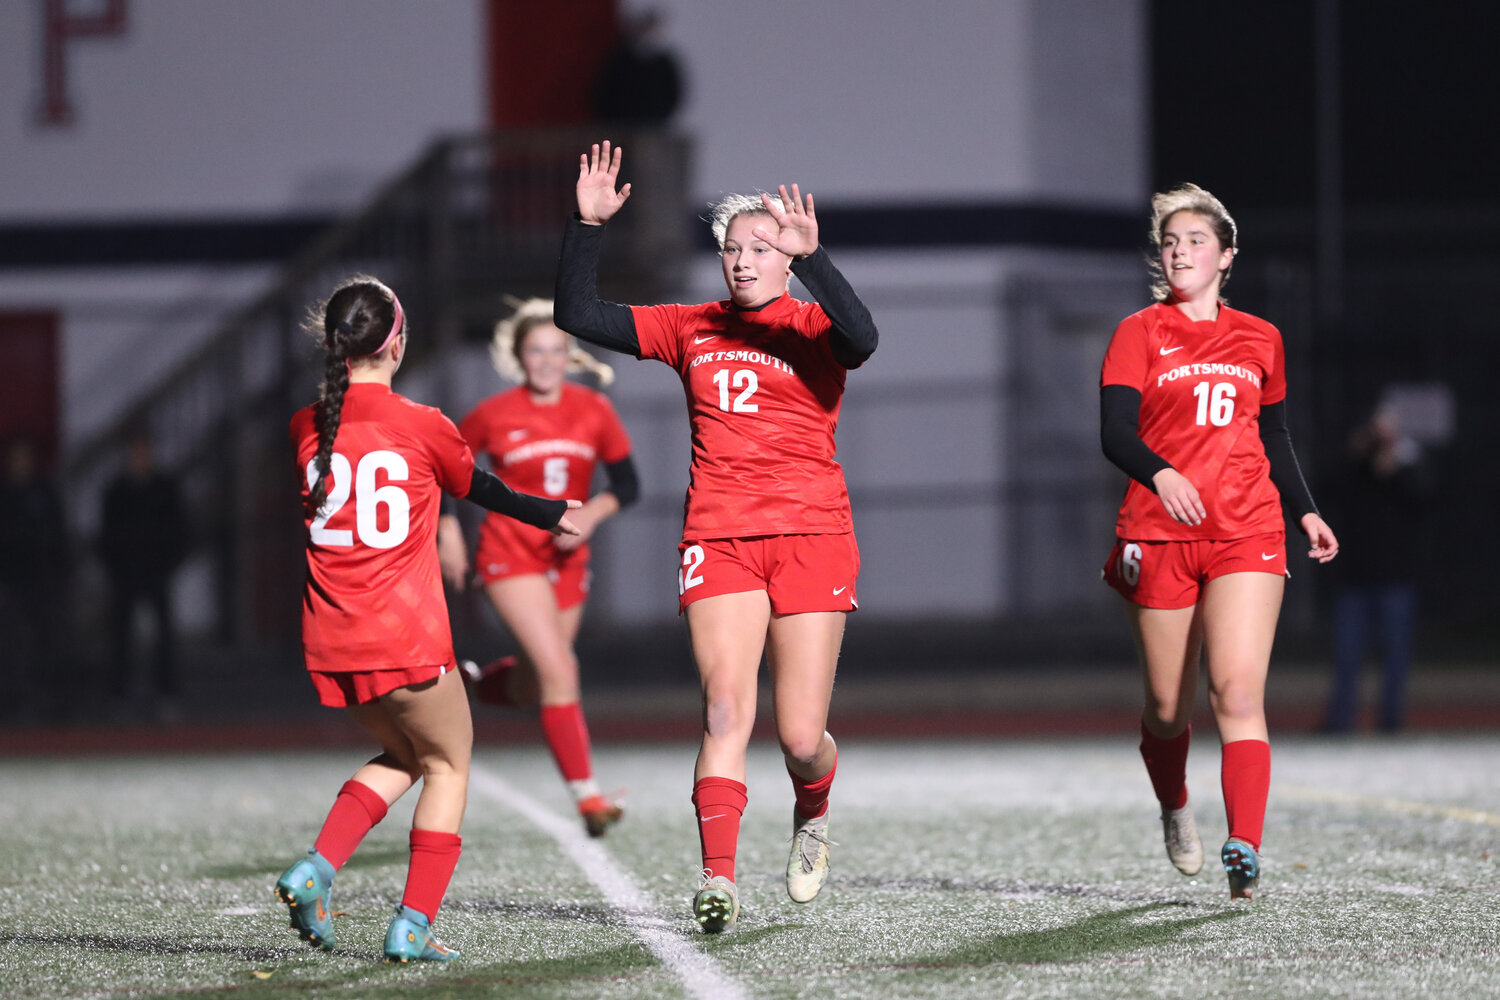 Portsmouth High’s Abigail Costa, Mollyana McGuire, and Evelyn Shuster (from left) celebrate a goal against North Smithfield during the Patriots’ 4-0 quarterfinal win last Friday. Lila Kirwin is in the background.